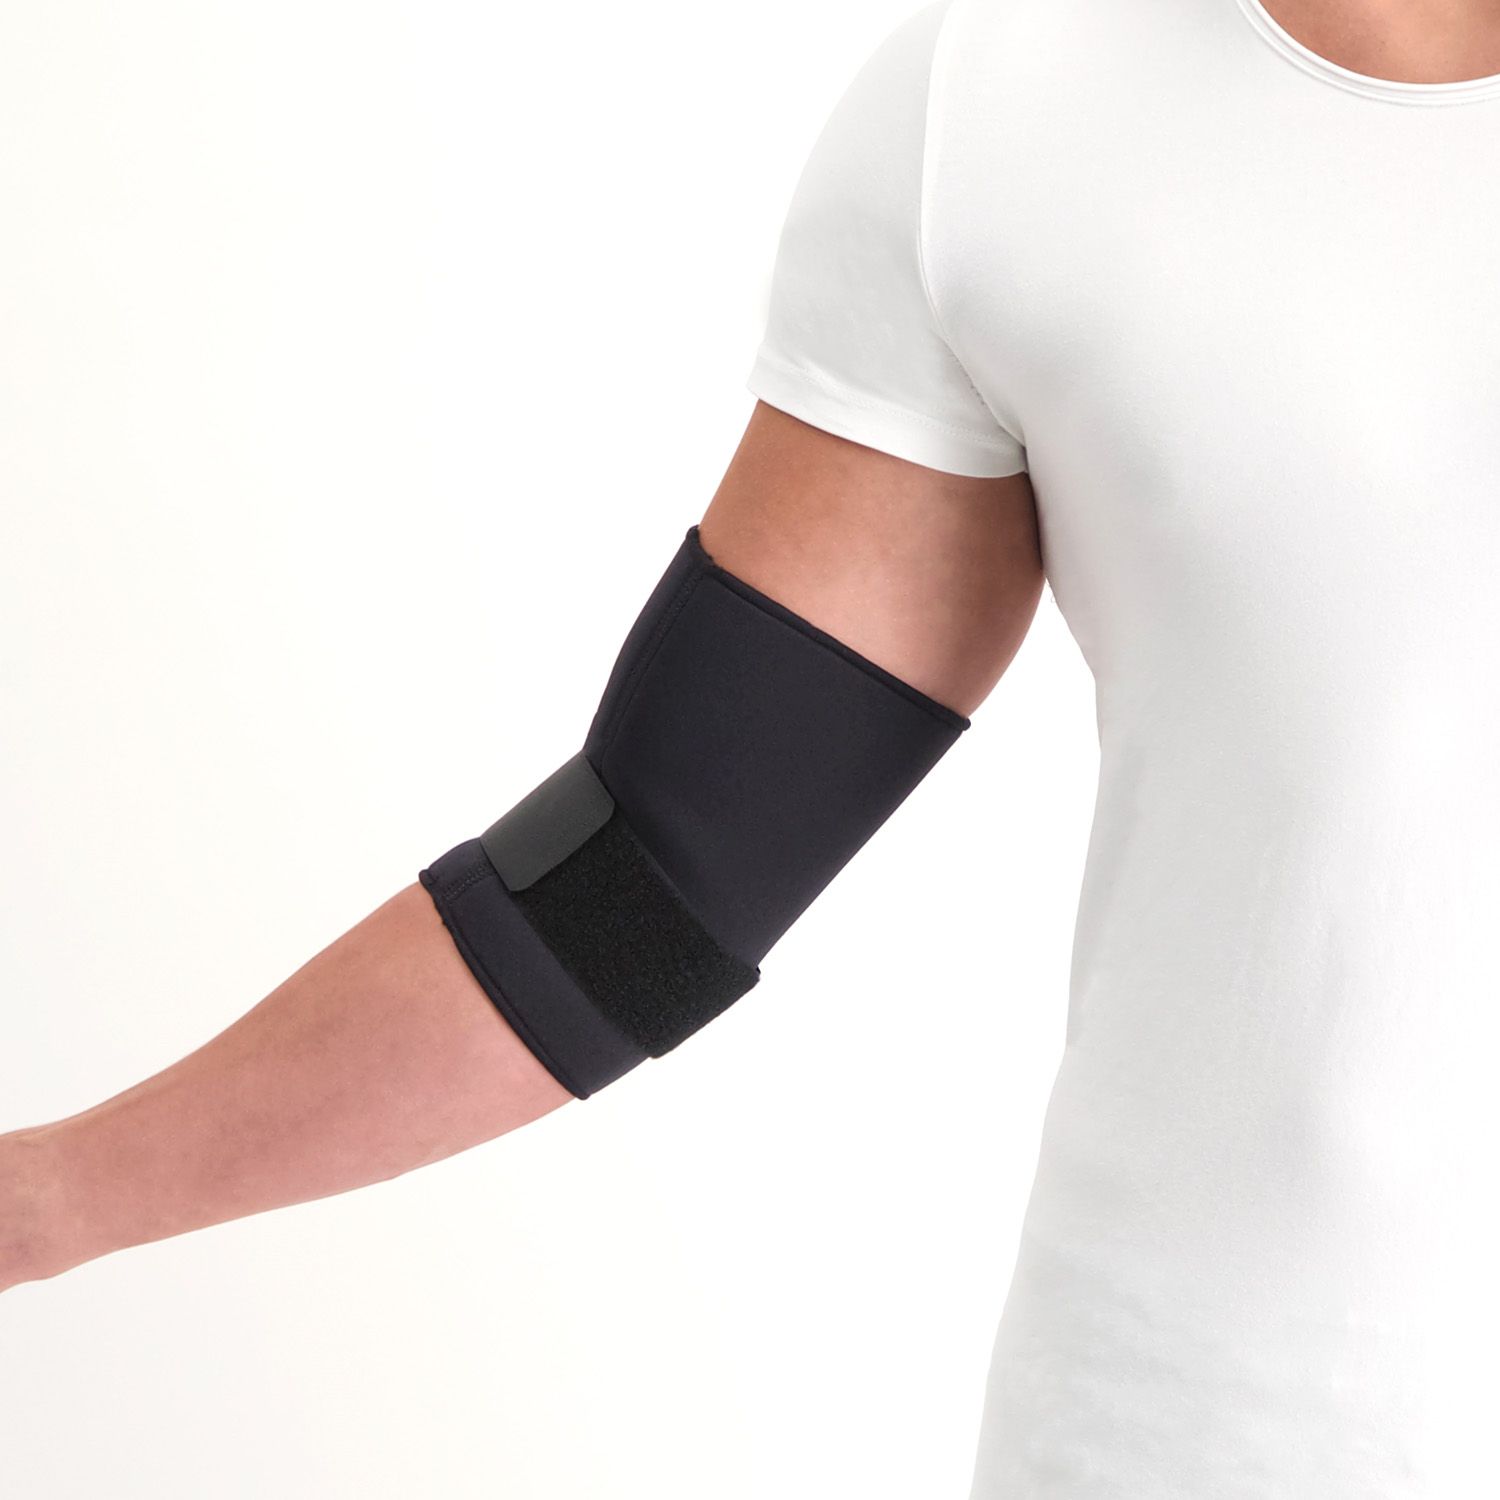 Dunimed Elbow Support worn by model